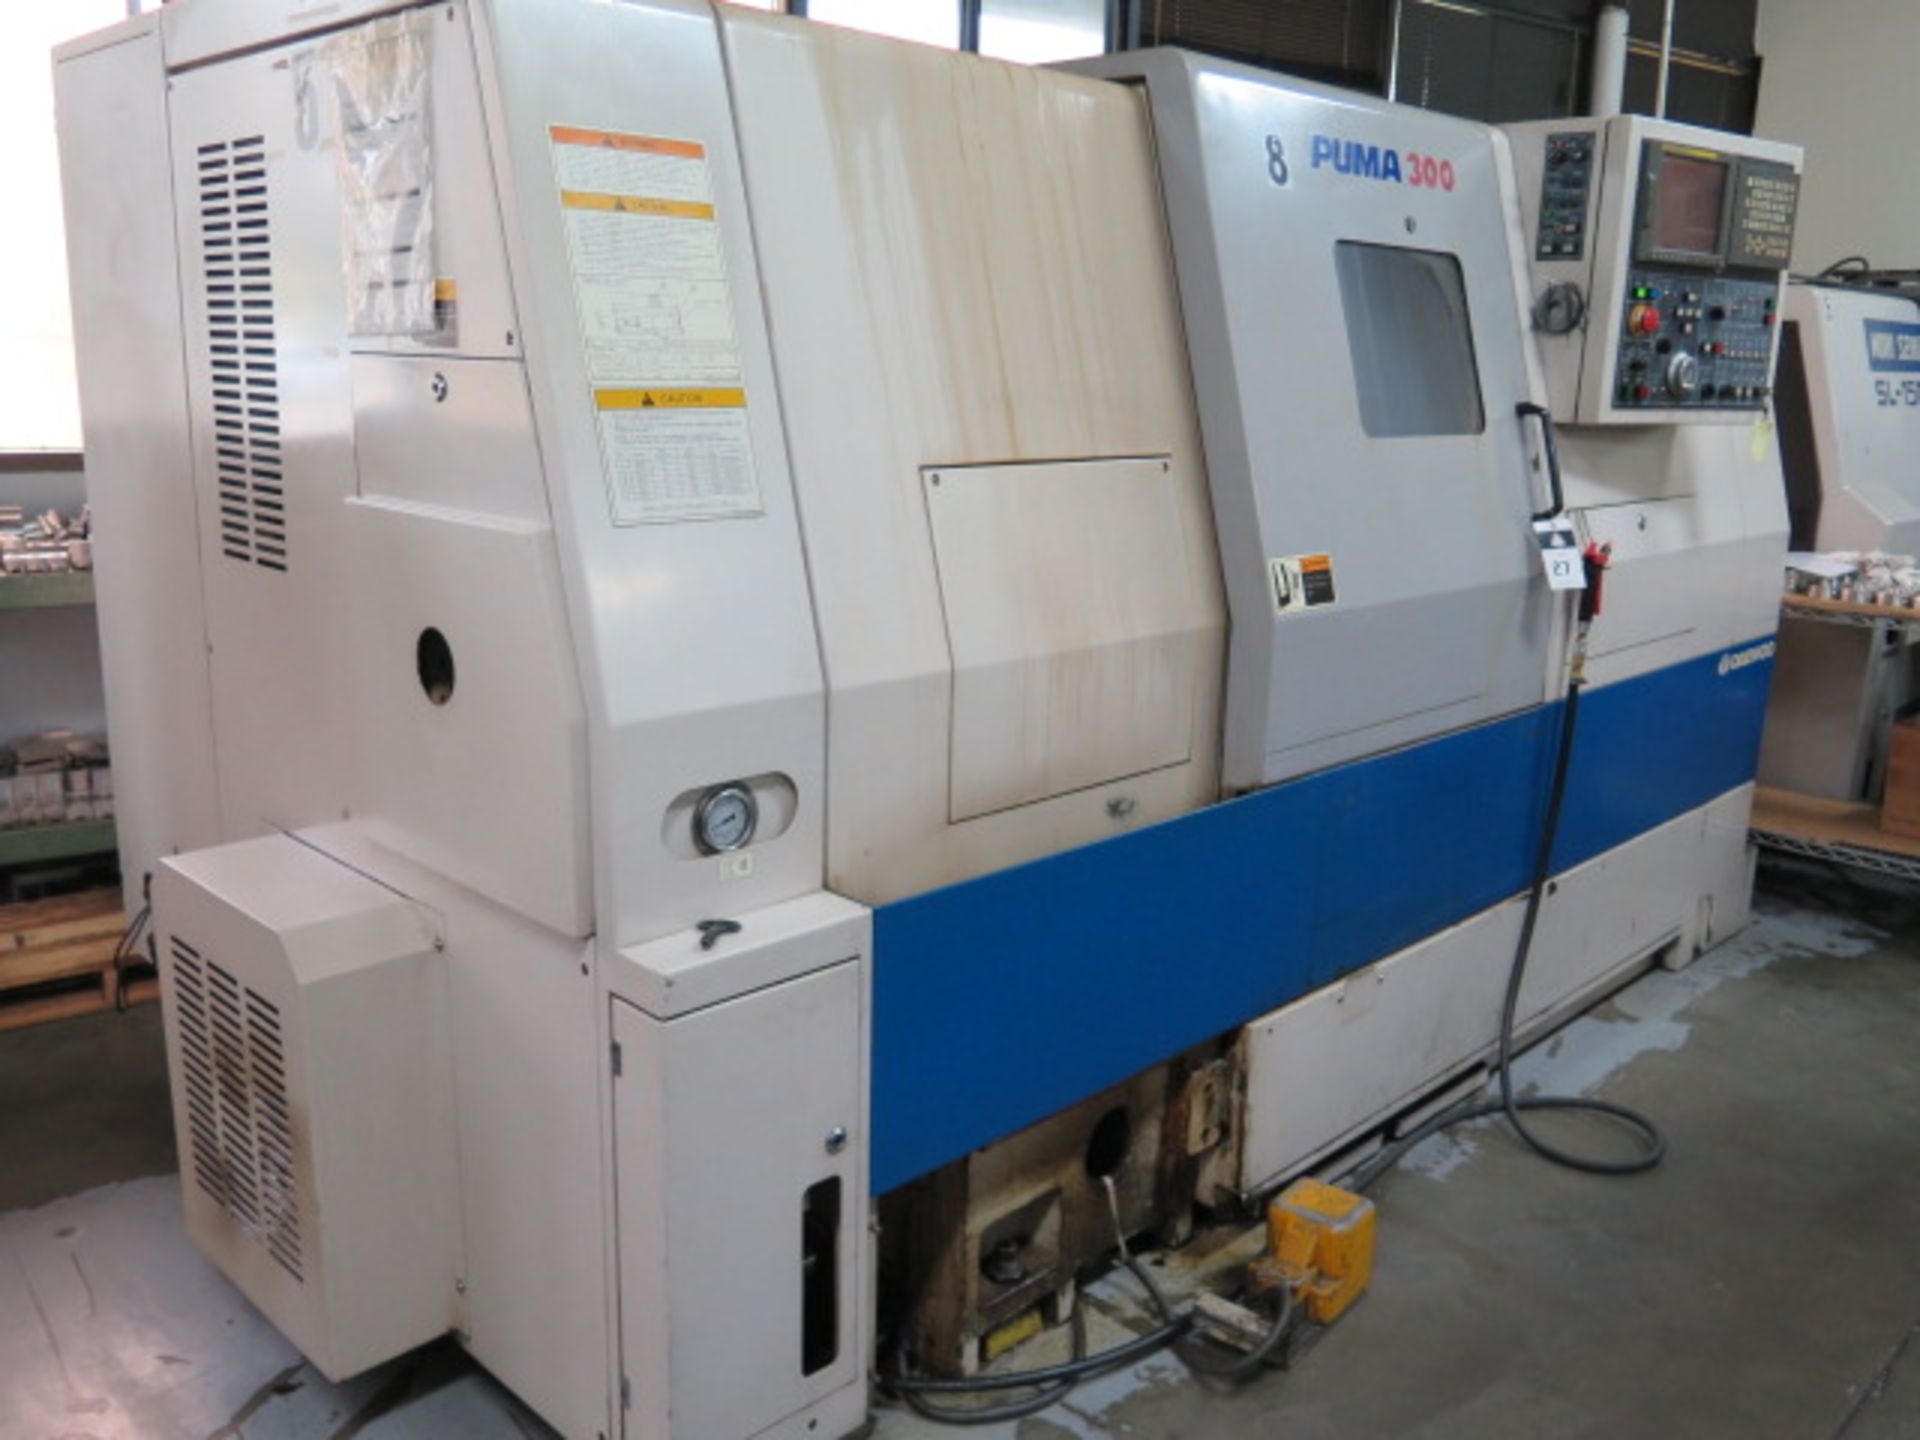 2000 Daewoo PUMA 300B CNC Turning Center s/n PN250827 w/ Fanuc Series 18i-T Controls, SOLD AS IS - Image 3 of 15